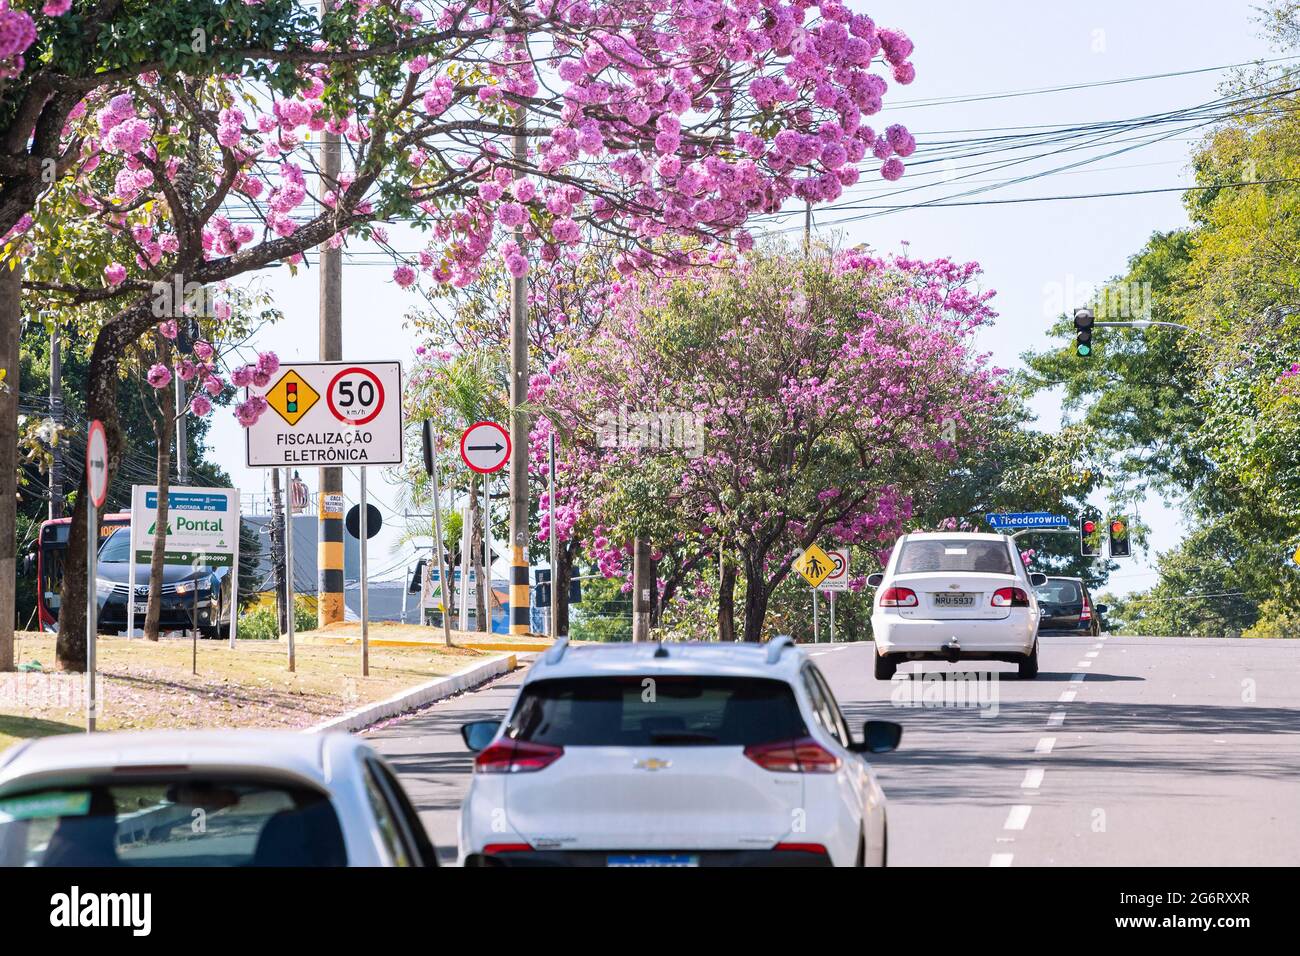 Campo Grande - MS, Brazil - July 4, 2021: Beautiful pink flowers of a Ipe trees at Mato Grosso avenue, Caranda Bosque neighborhood. Tree symbol of the Stock Photo